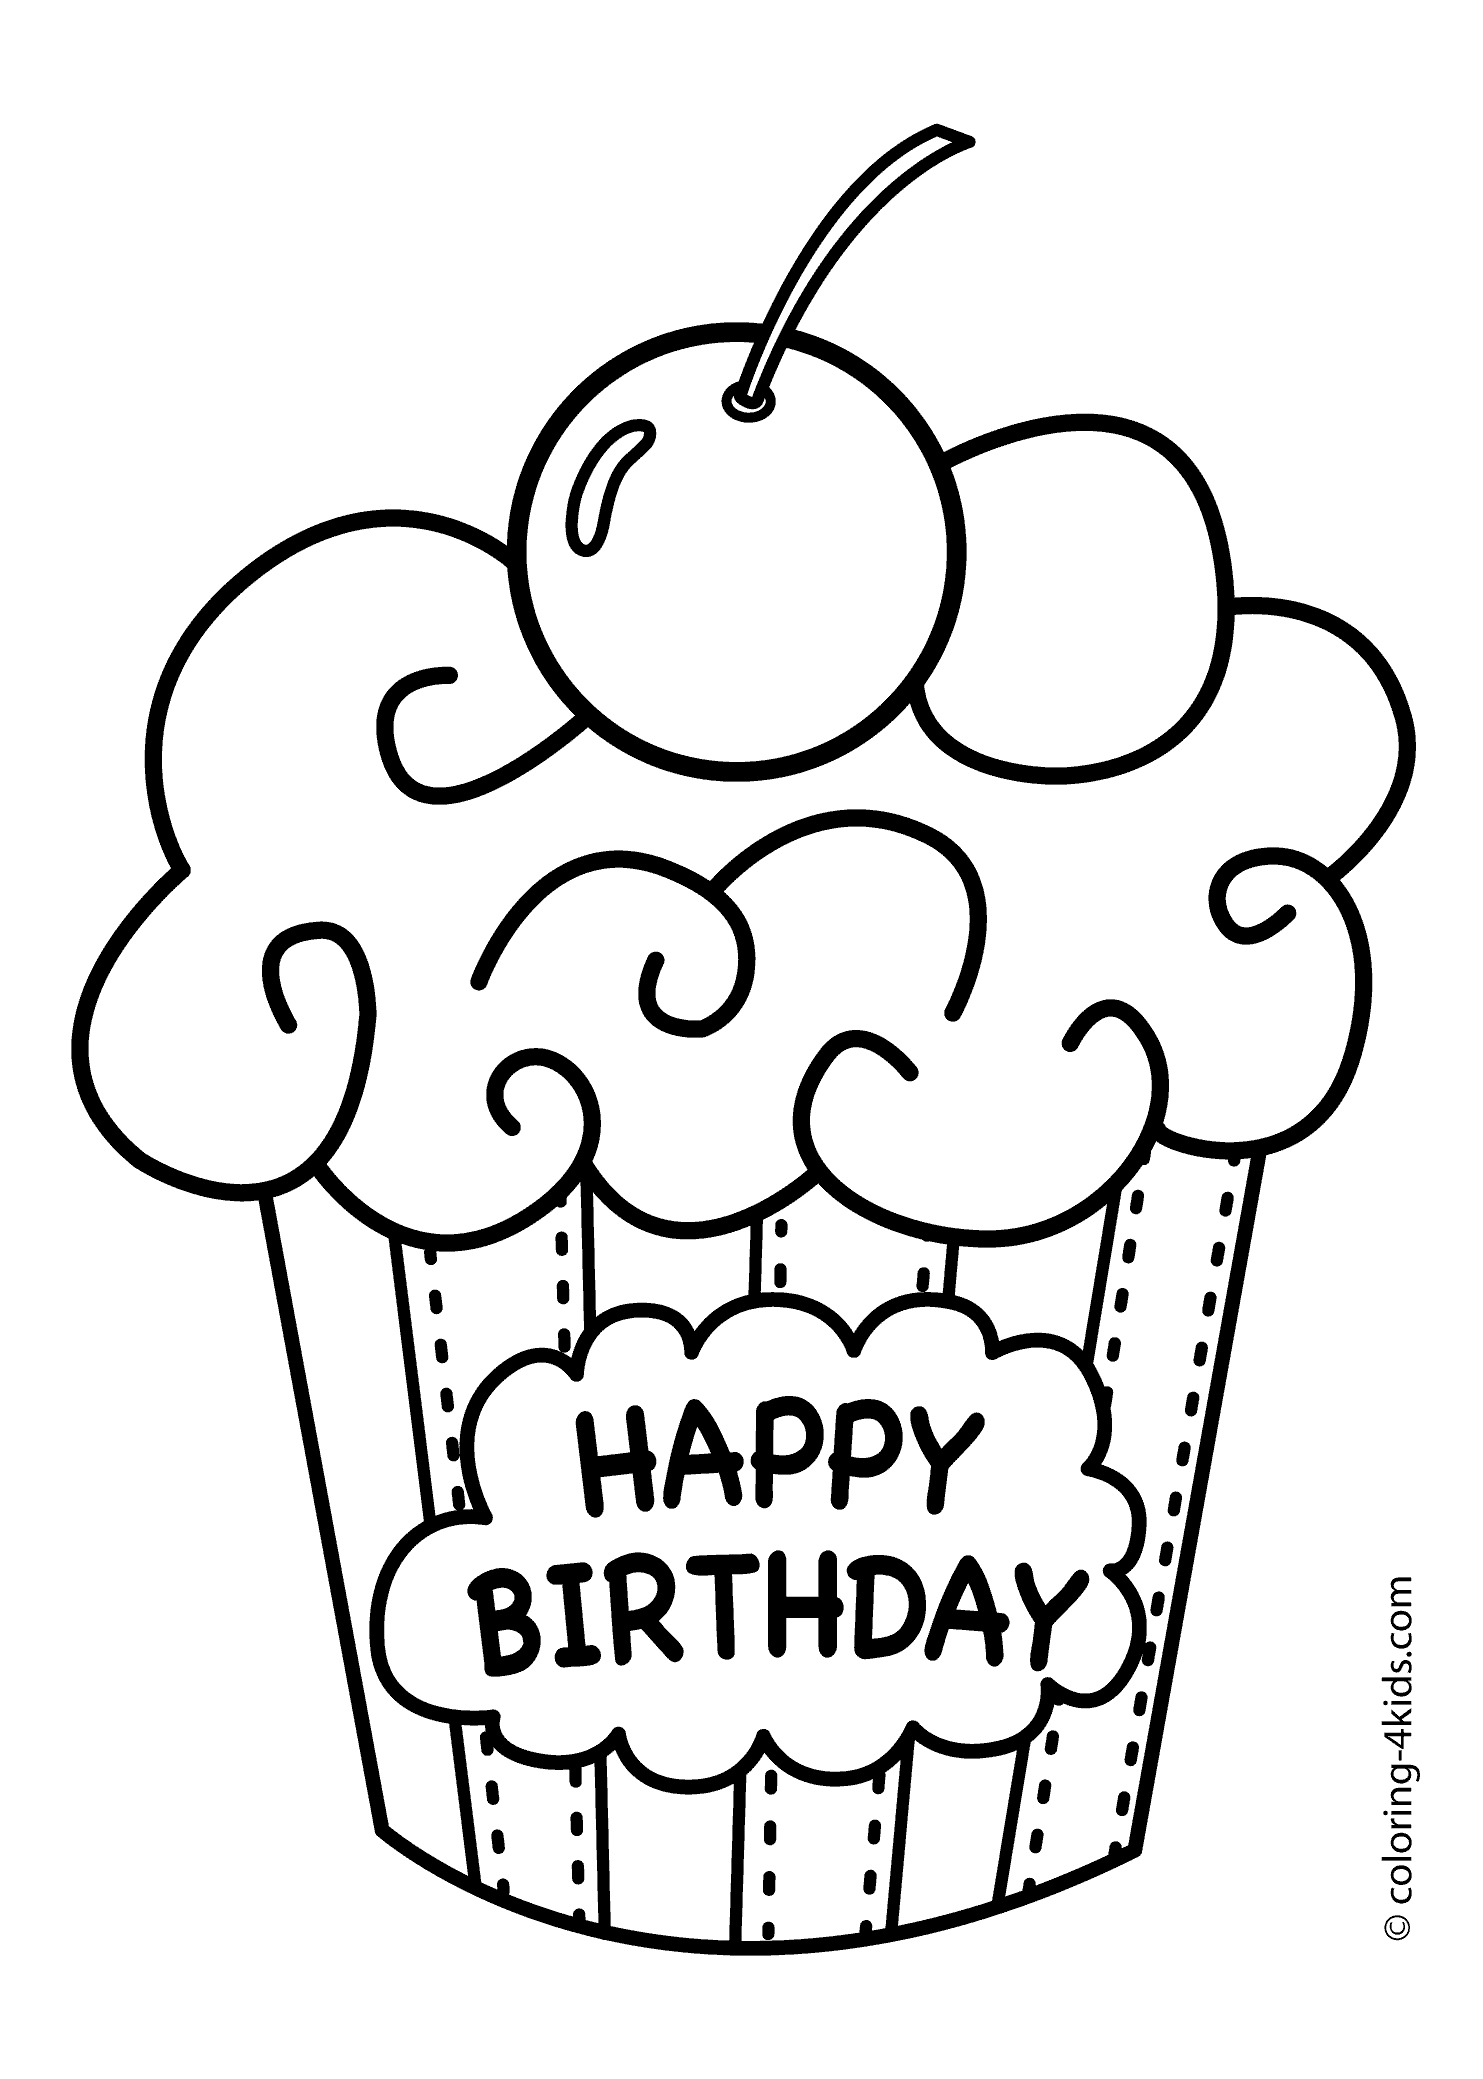 380 Animal Free Birthday Coloring Pages To Print for Kindergarten